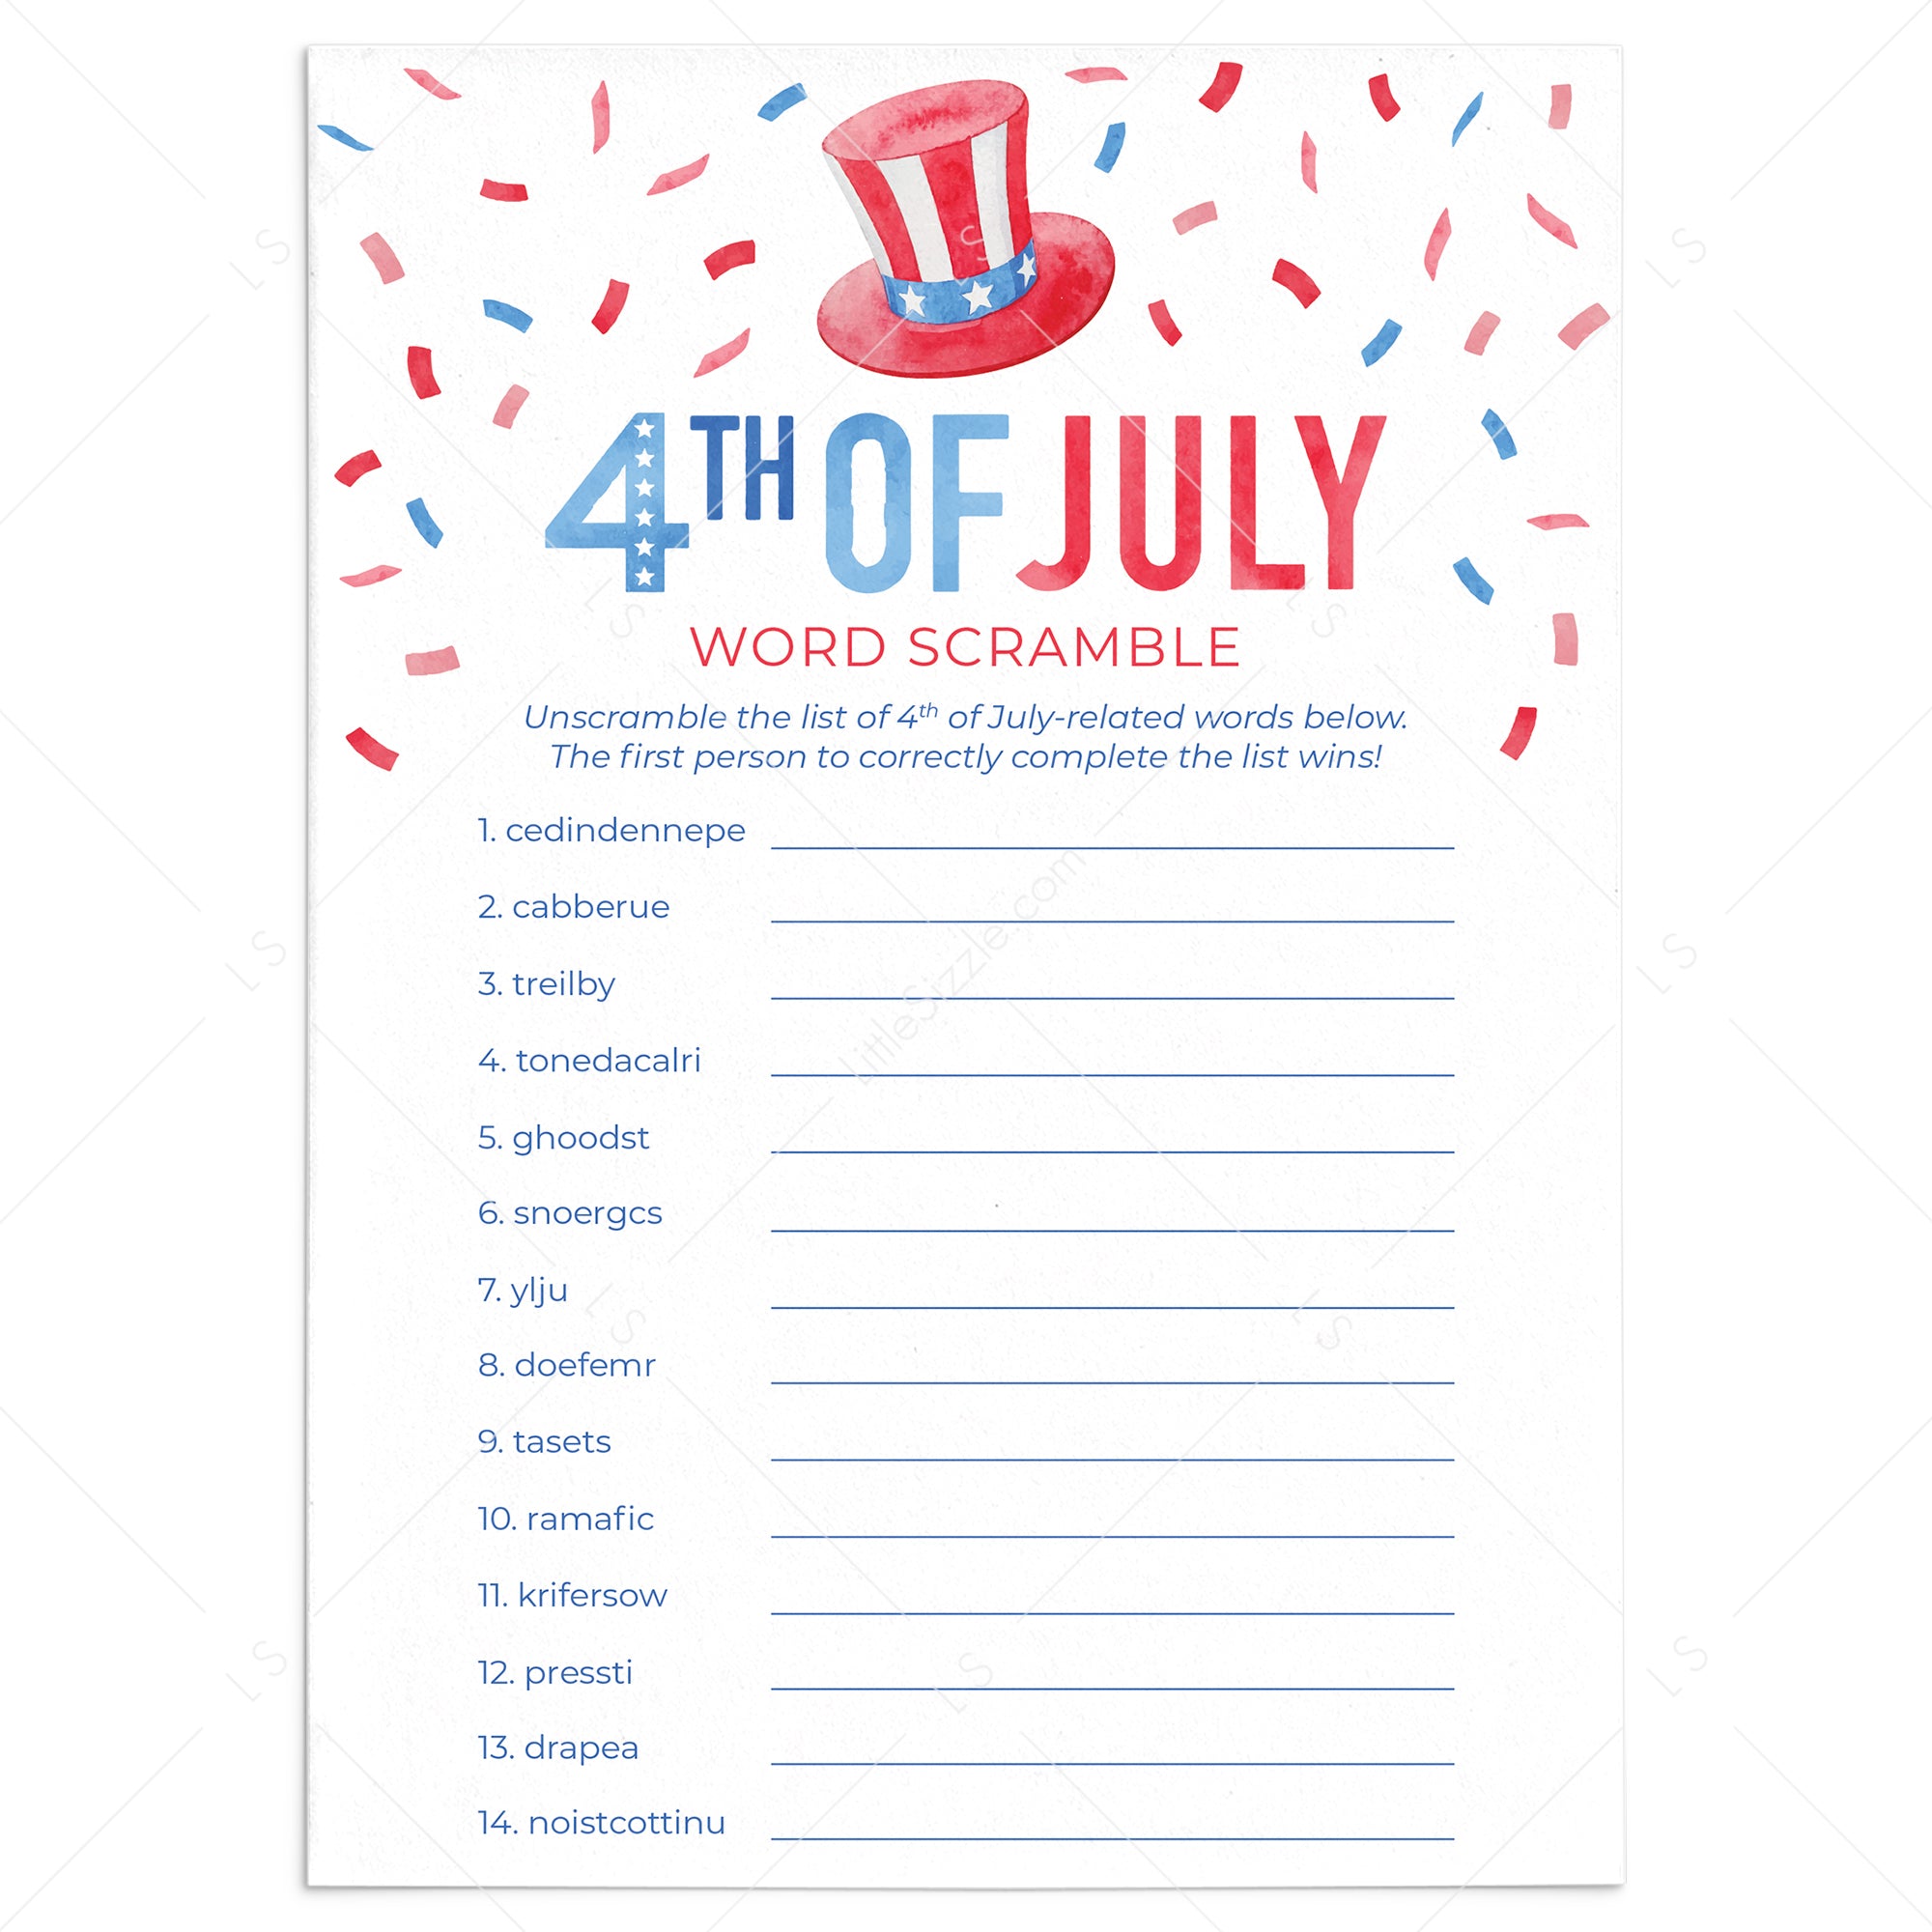 4th of July Word Scramble with Answers Printable by LittleSizzle